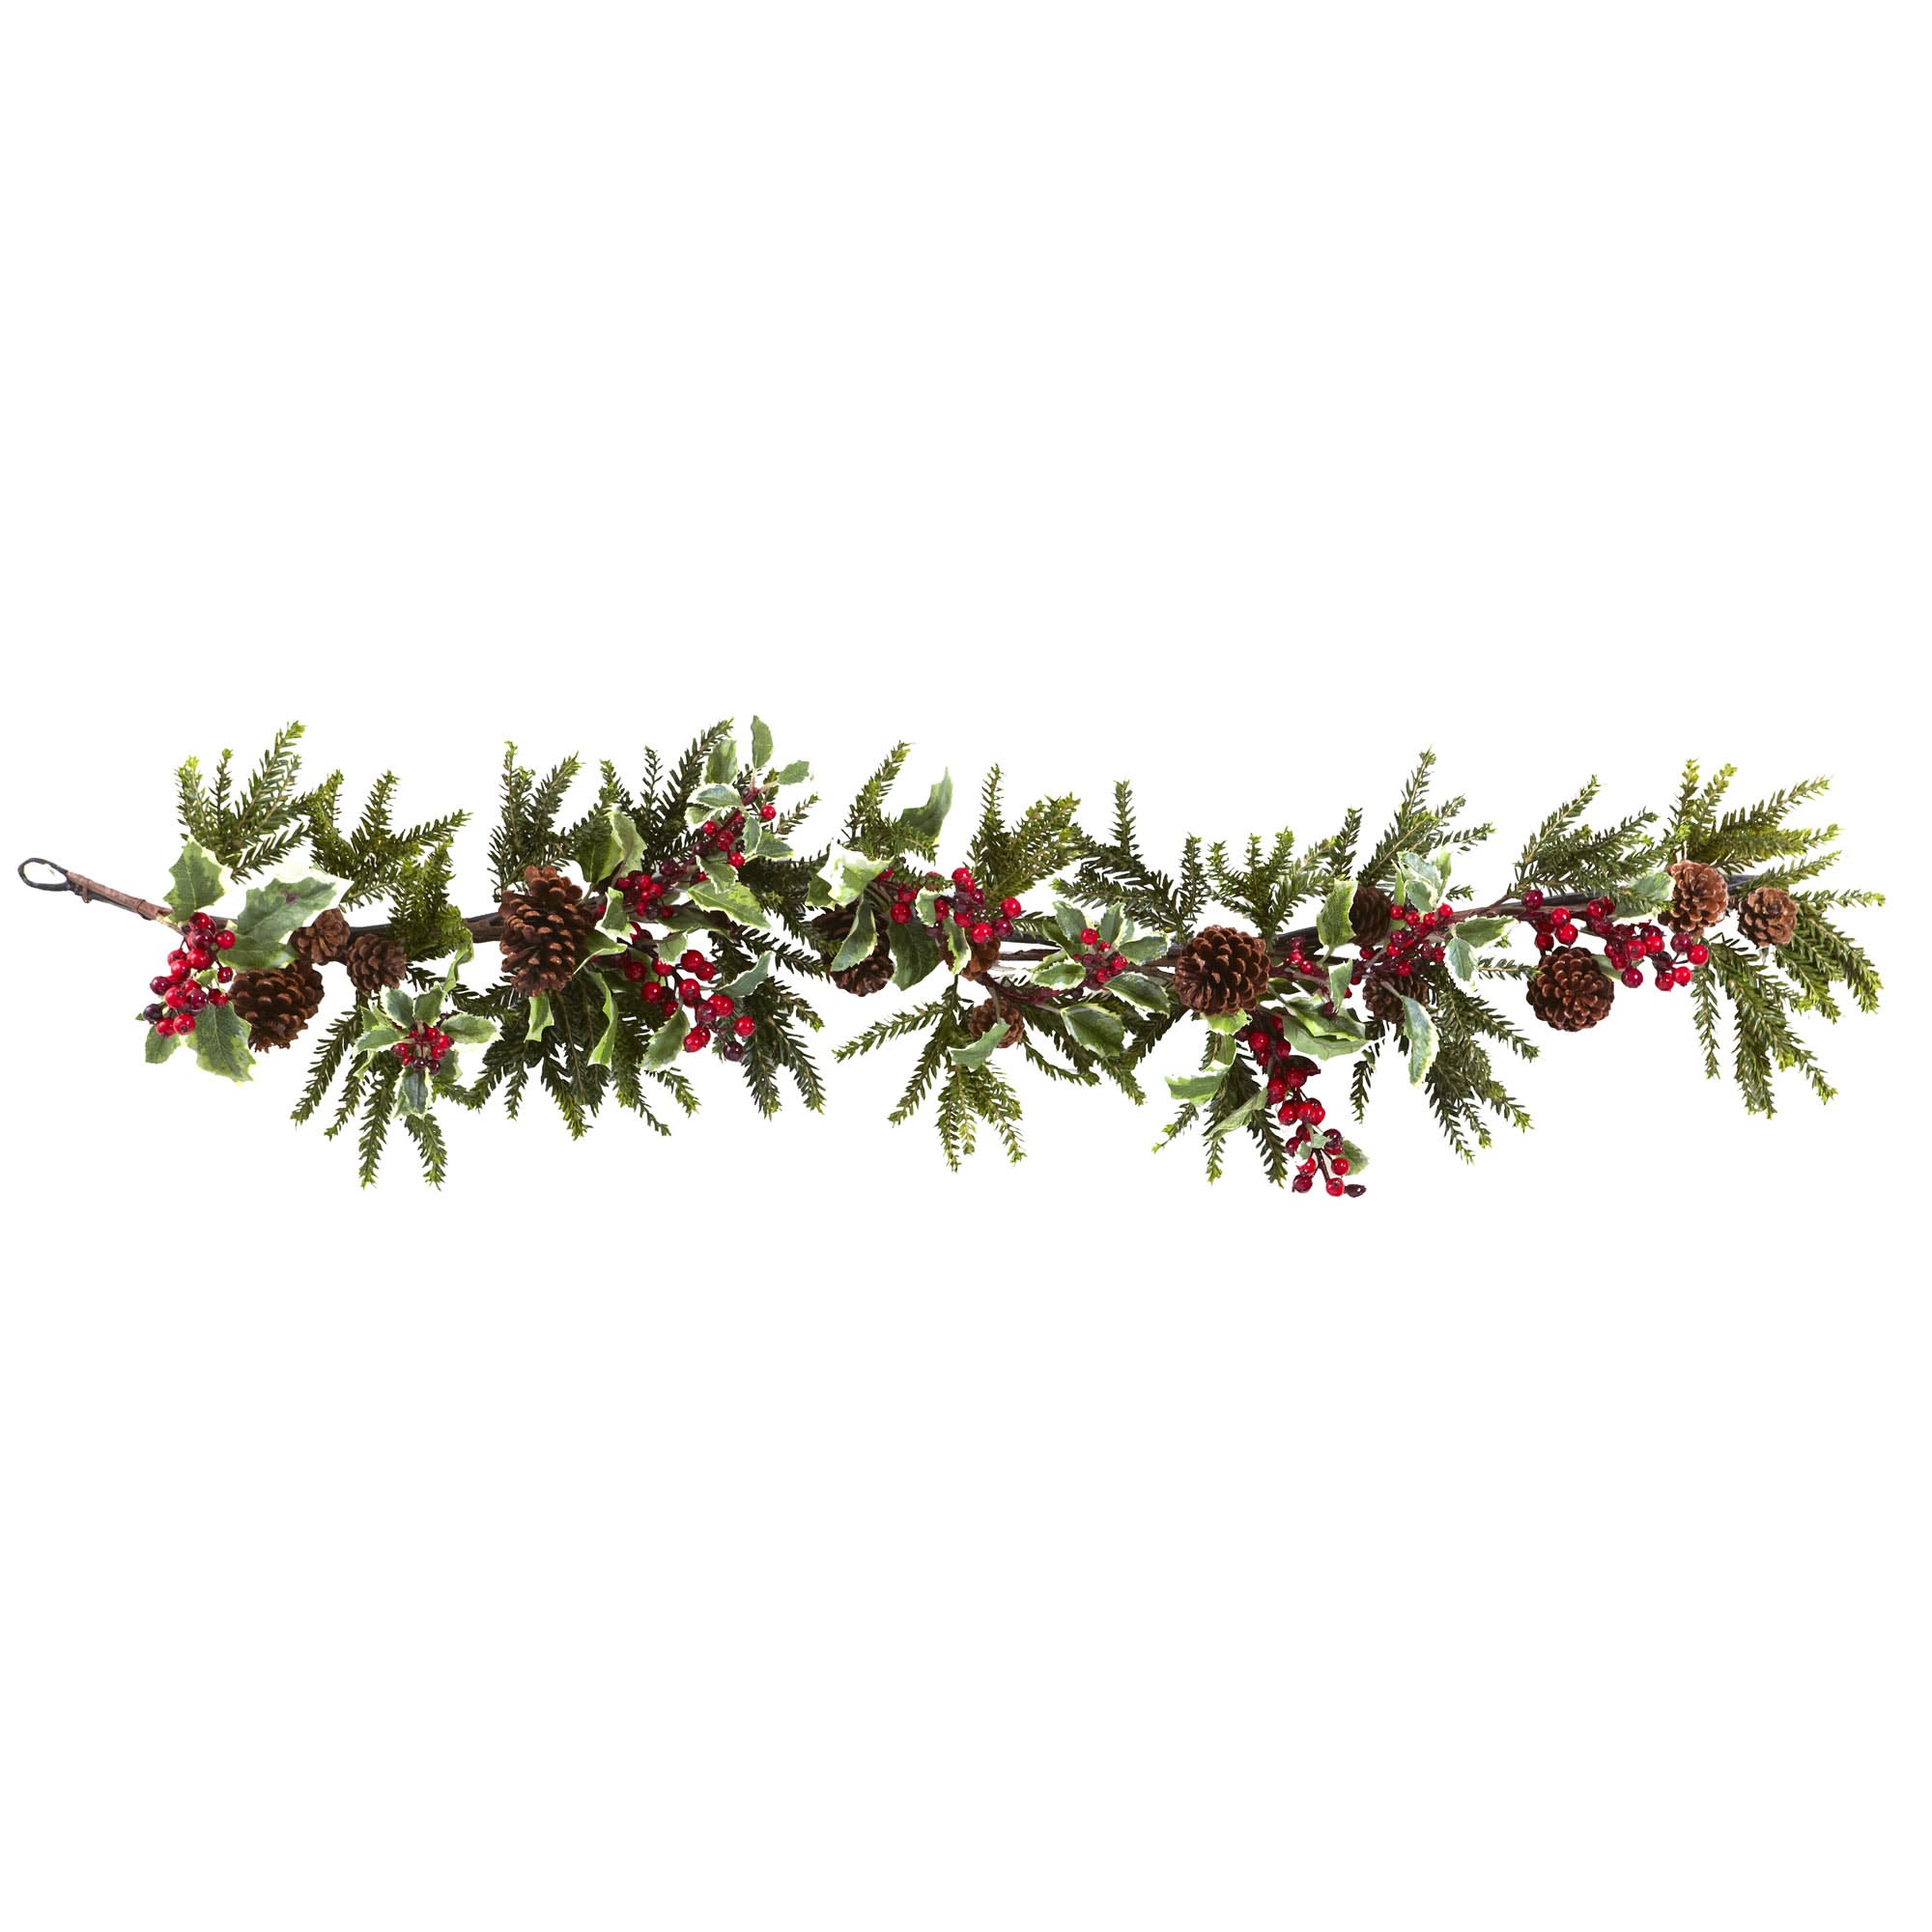 Details about   100x Artificial Red Holly Berry Christmas Decor On Wire Bundle Garland Wreath US 